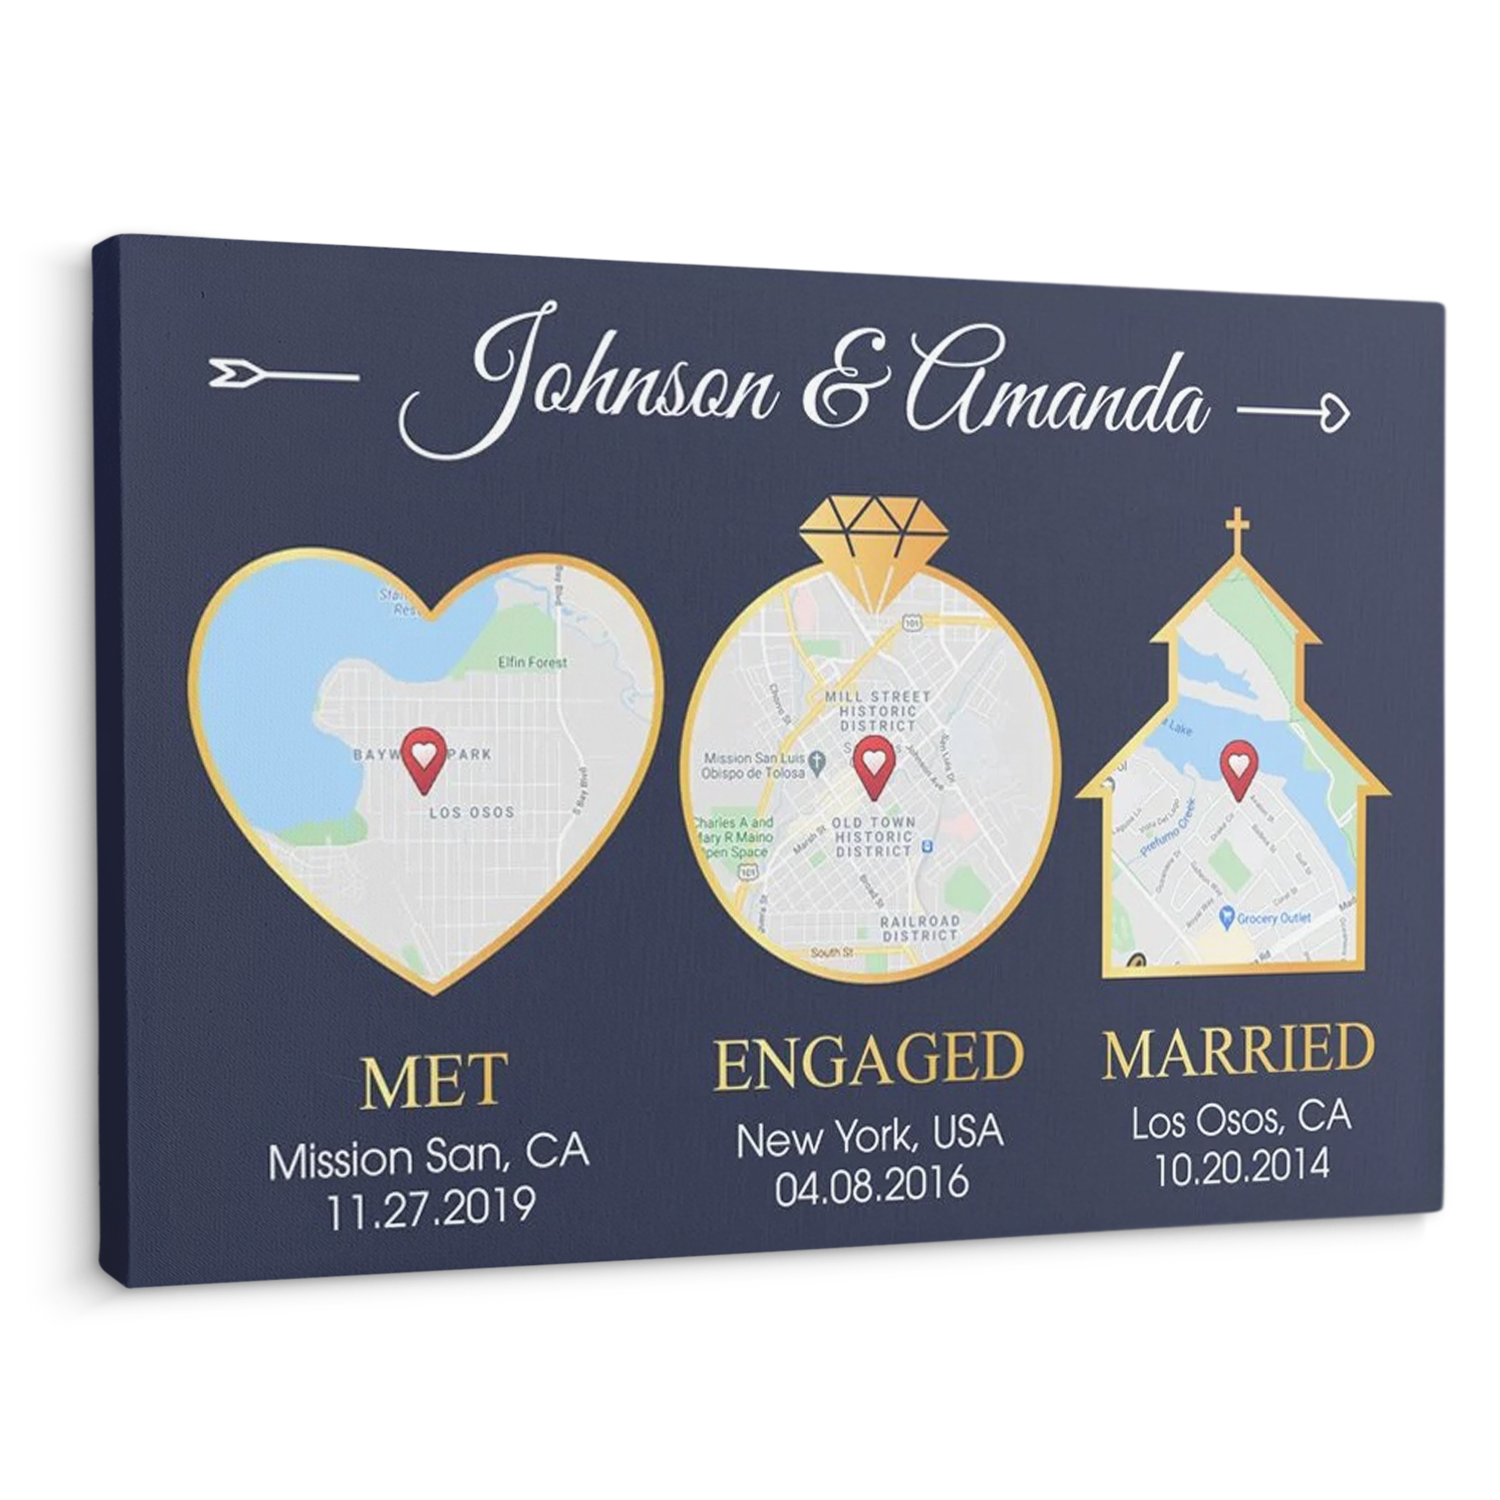 Custom Map And Text, Met Engaged Married Navy Background Canvas